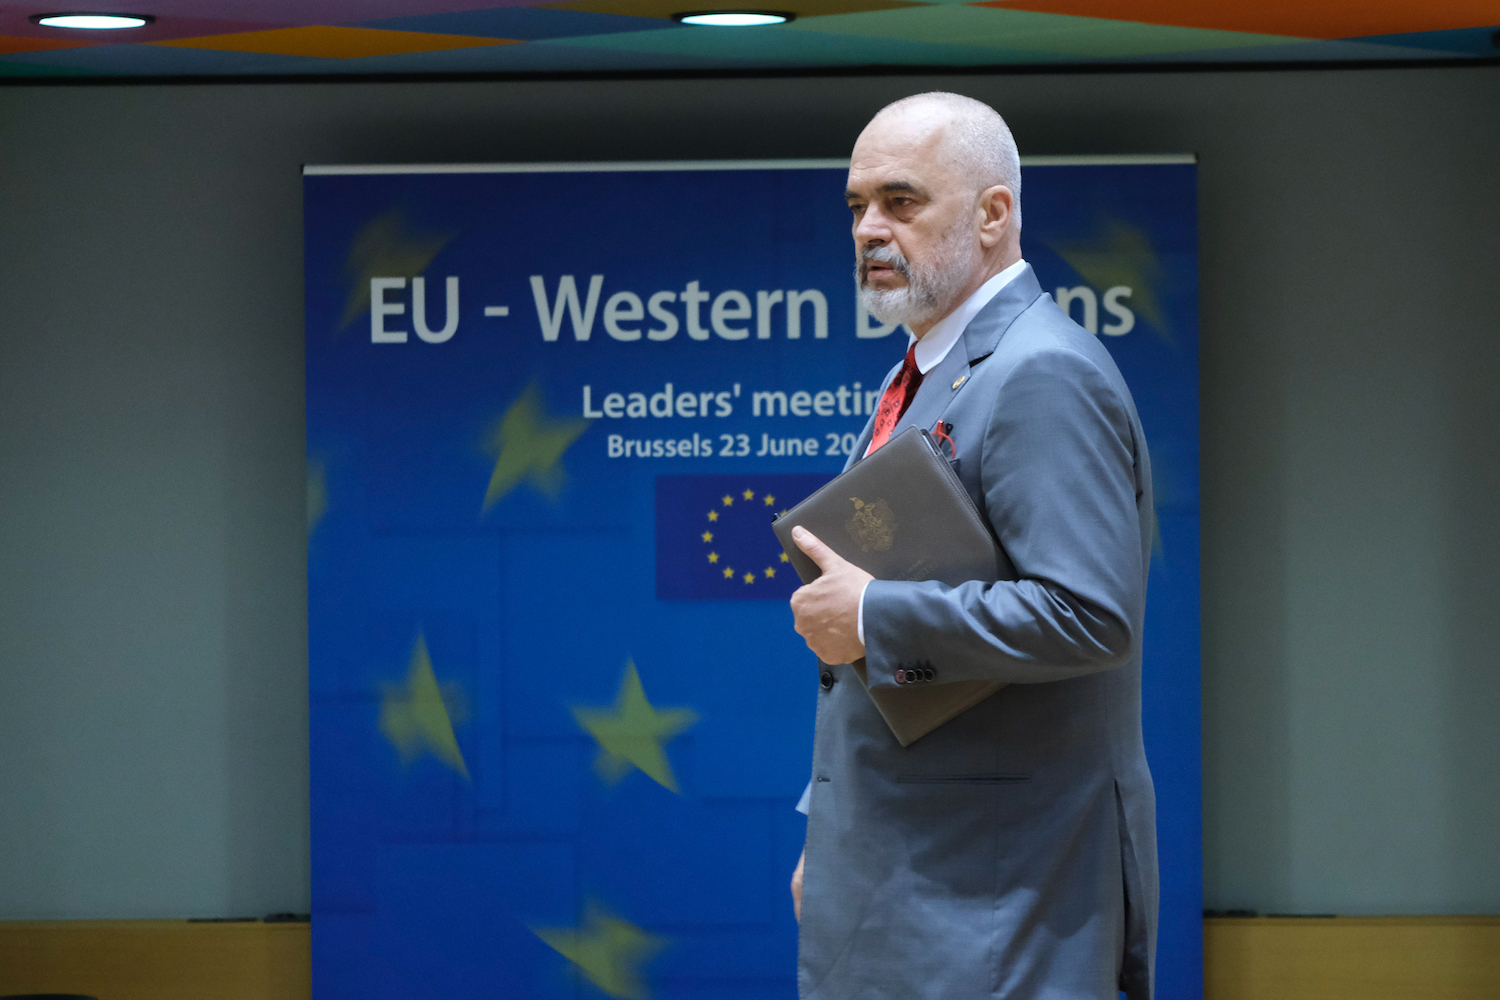 With all eyes on Ukraine, has the EU given up on the Western Balkans?